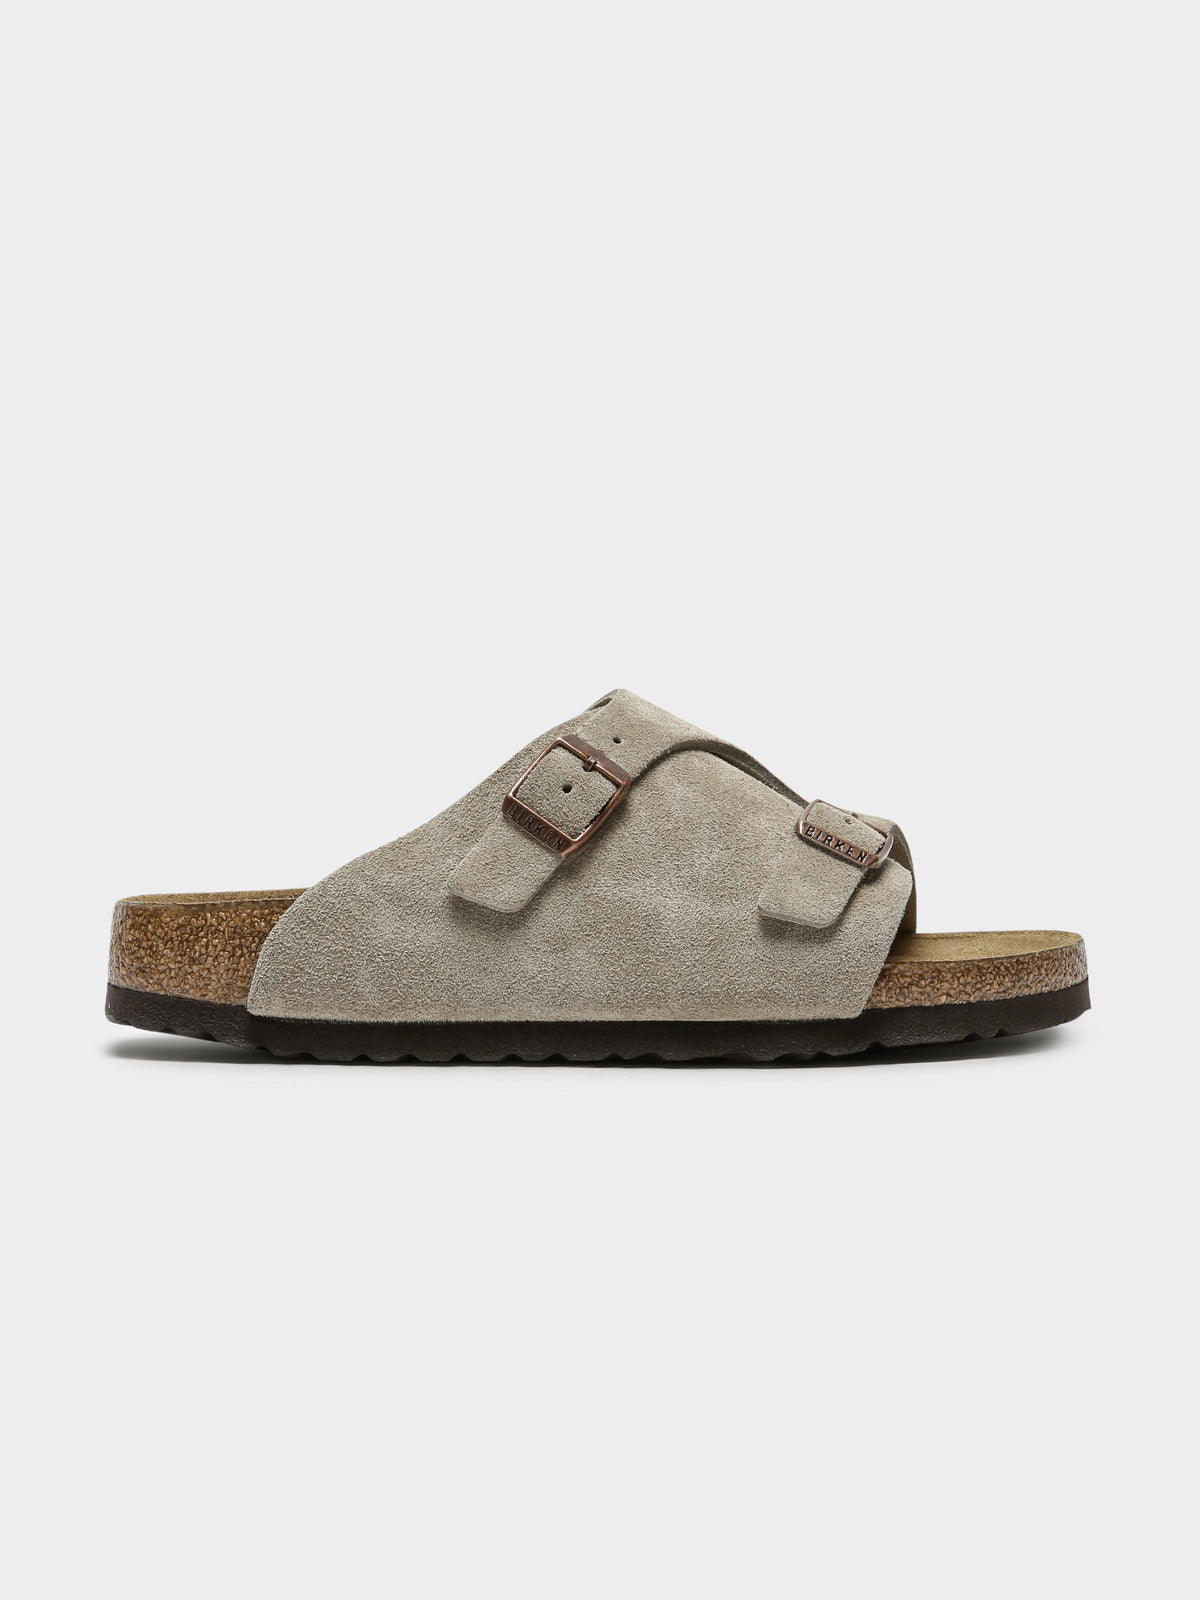 Unisex Zurich Suede Soft Footbed Narrow in Taupe